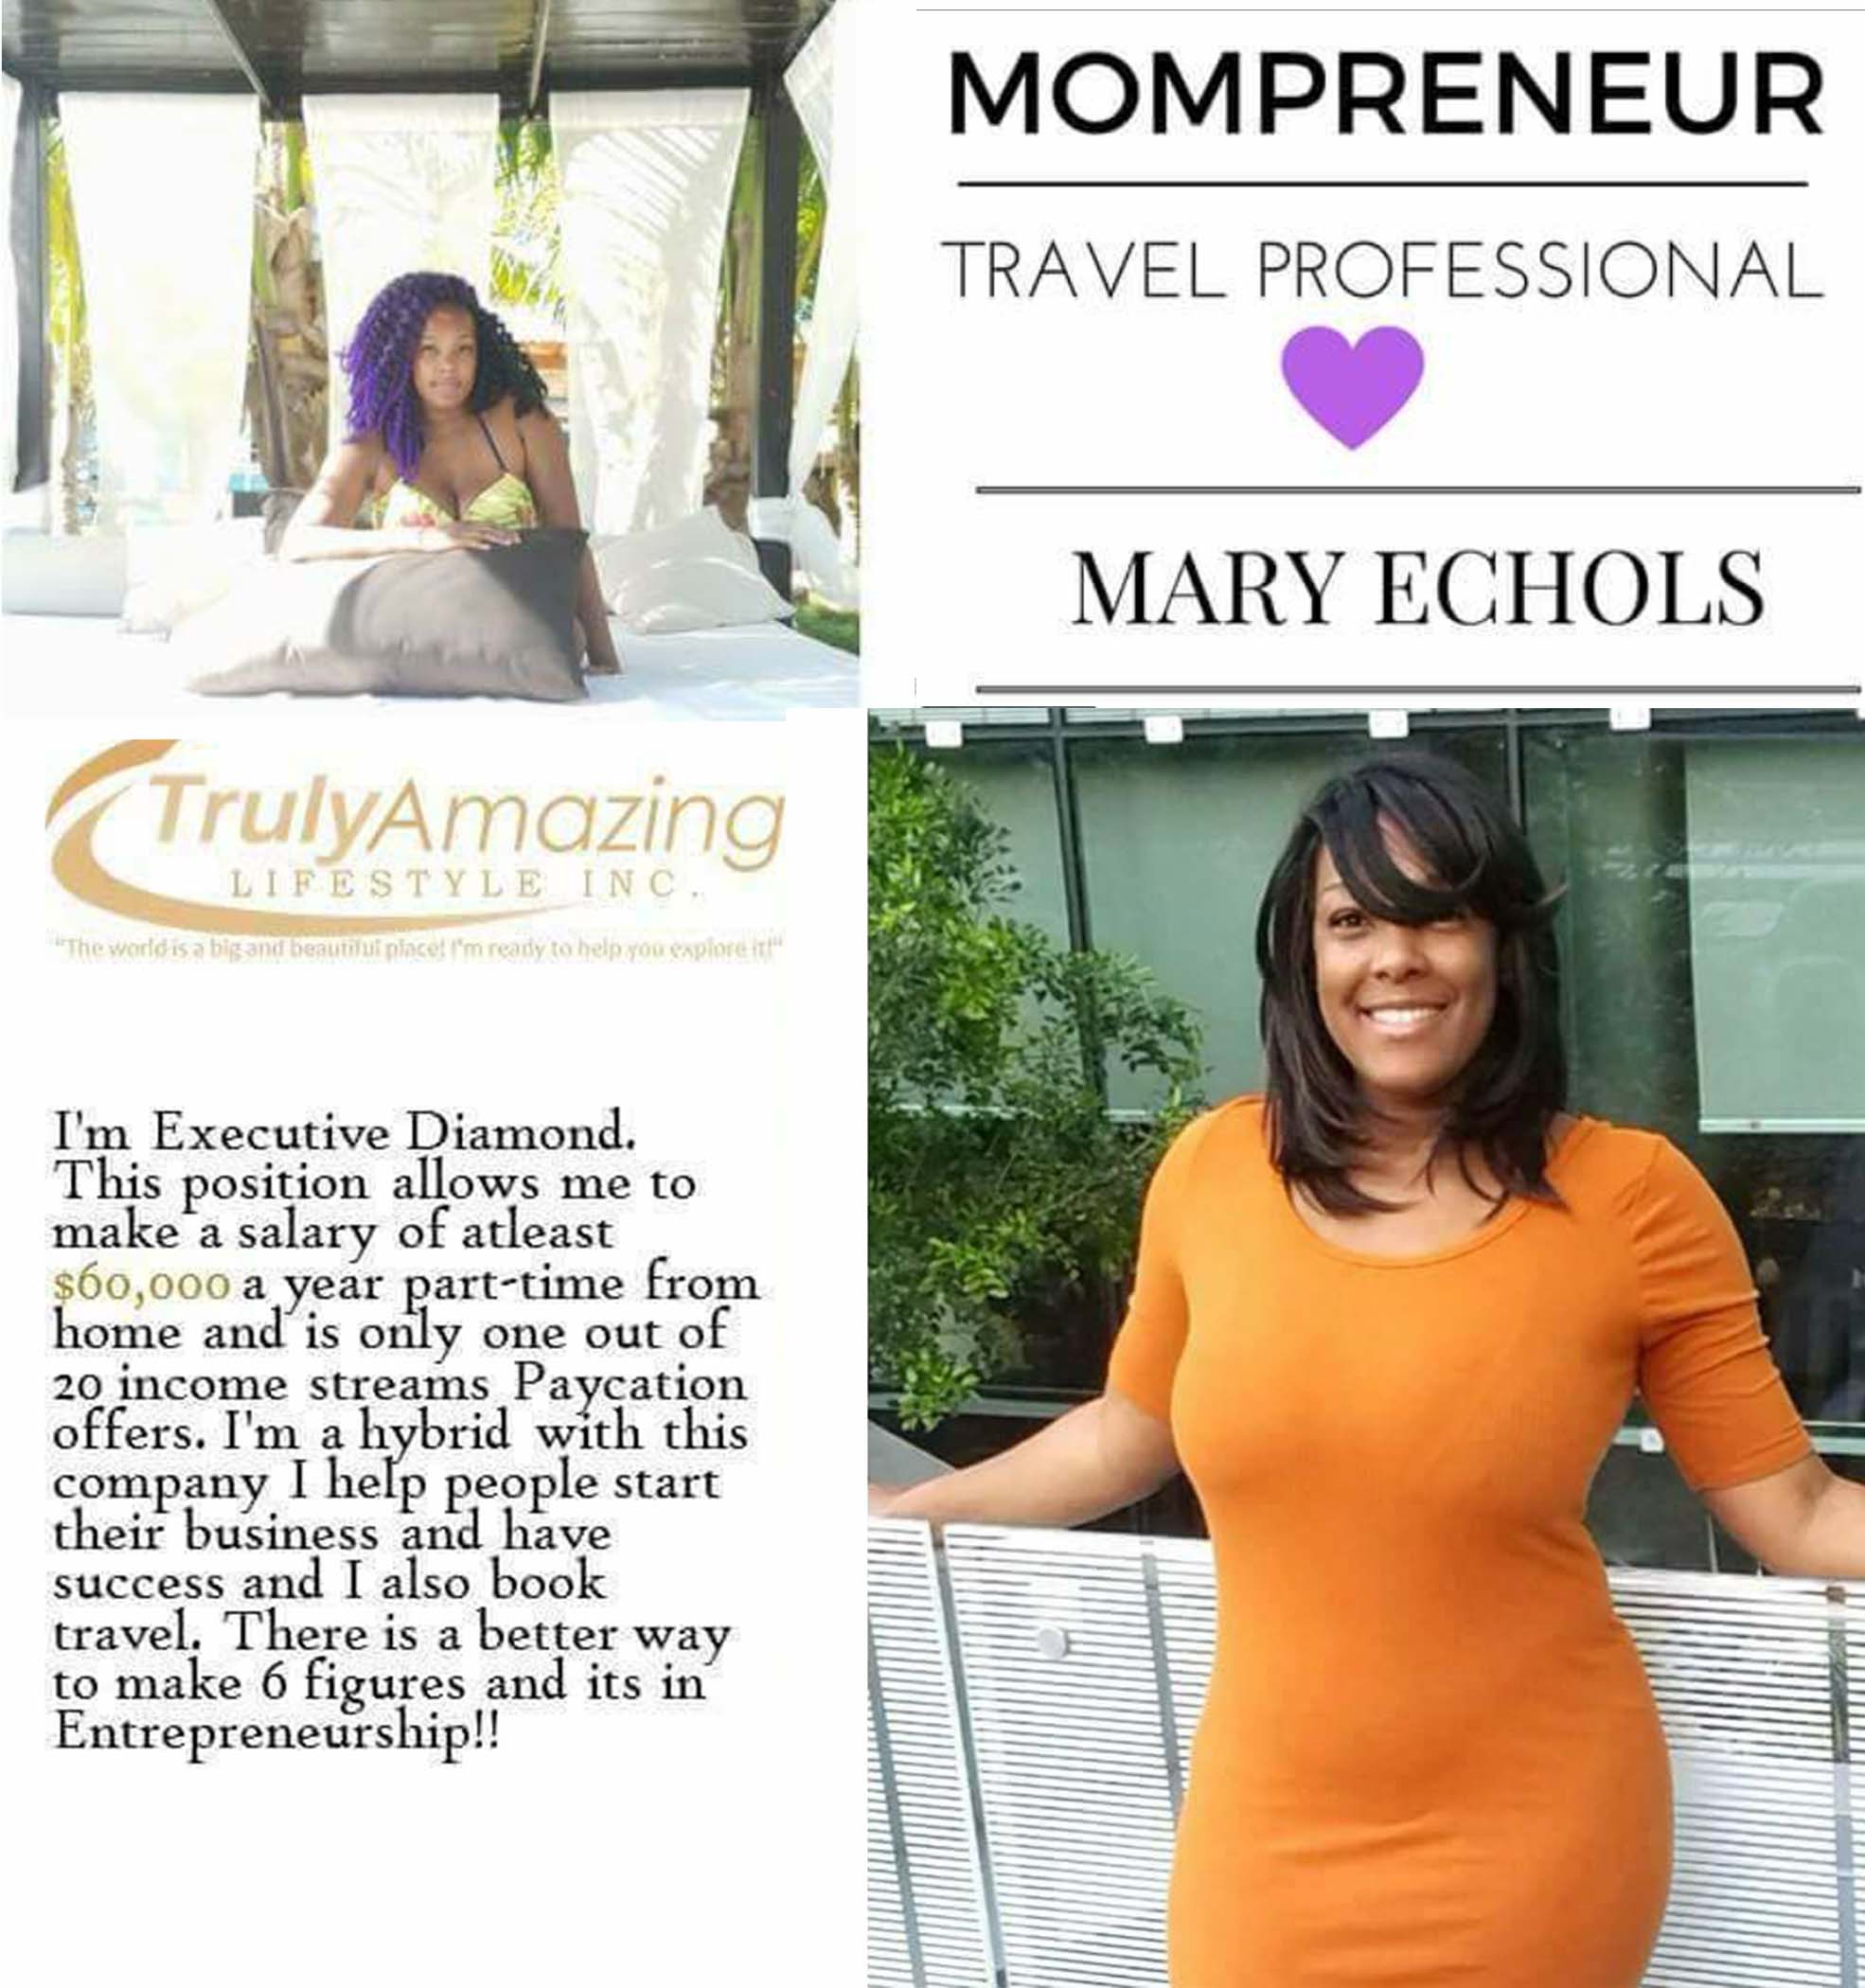 She is now running a corporation of lifestyle in travel, events, and hairstyles; she is only 27 years old with three children and a husband.